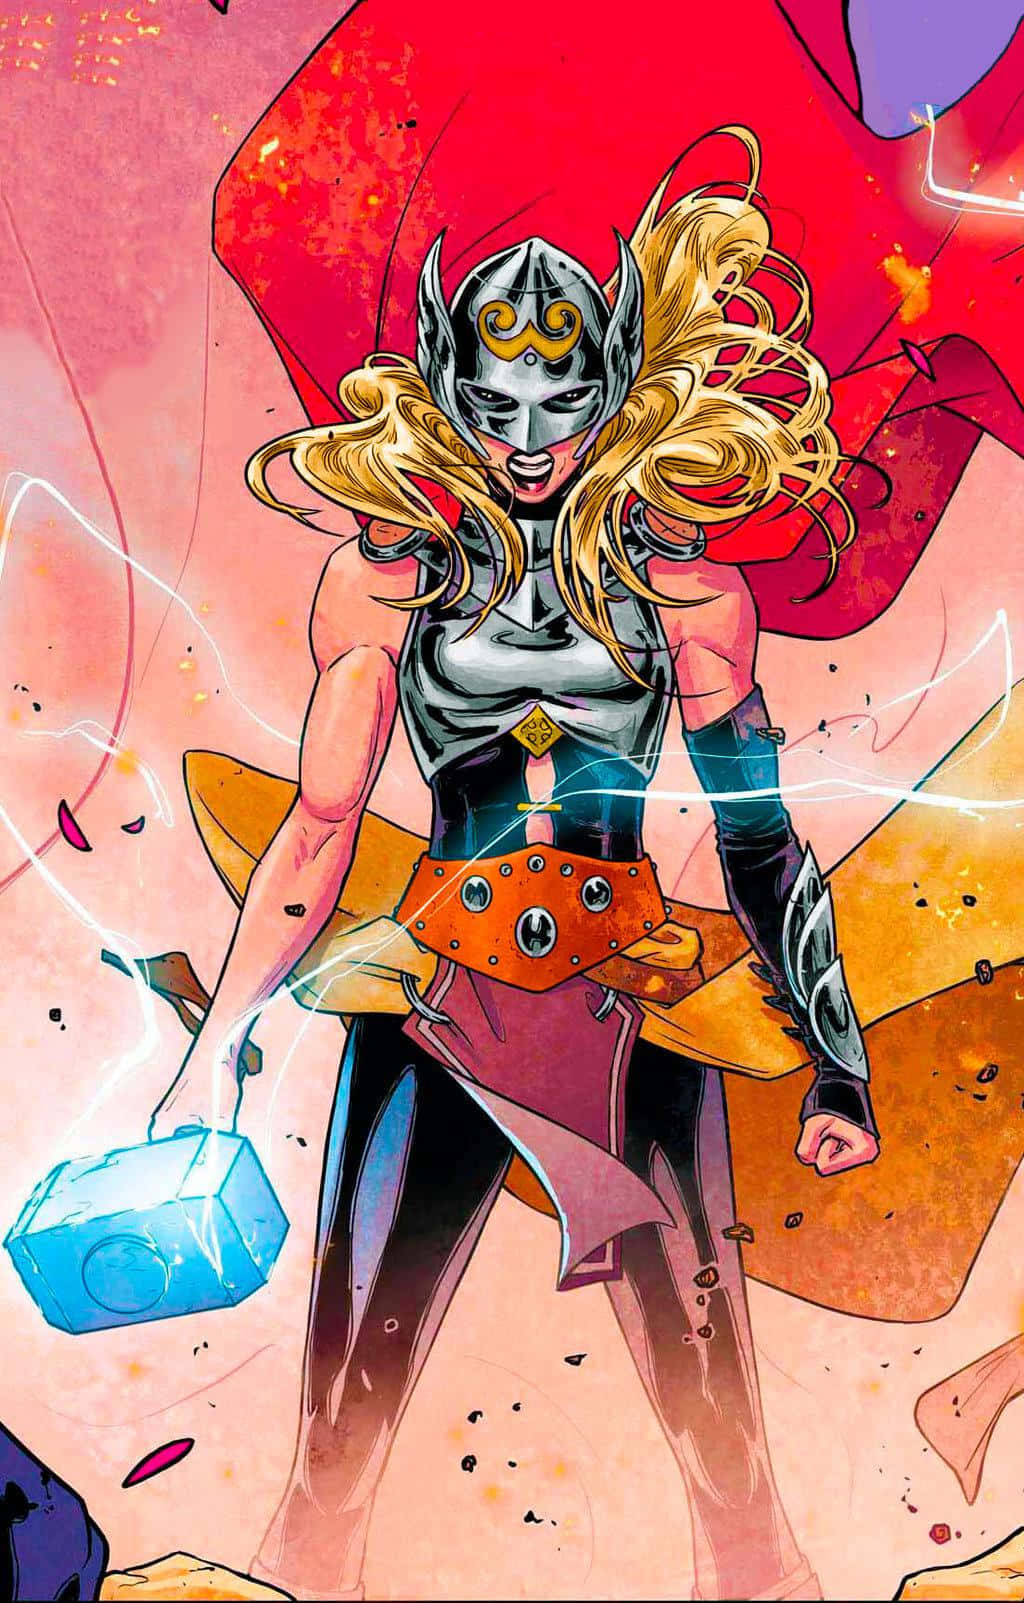 Jane Foster standing tall and powerful in her costume Wallpaper